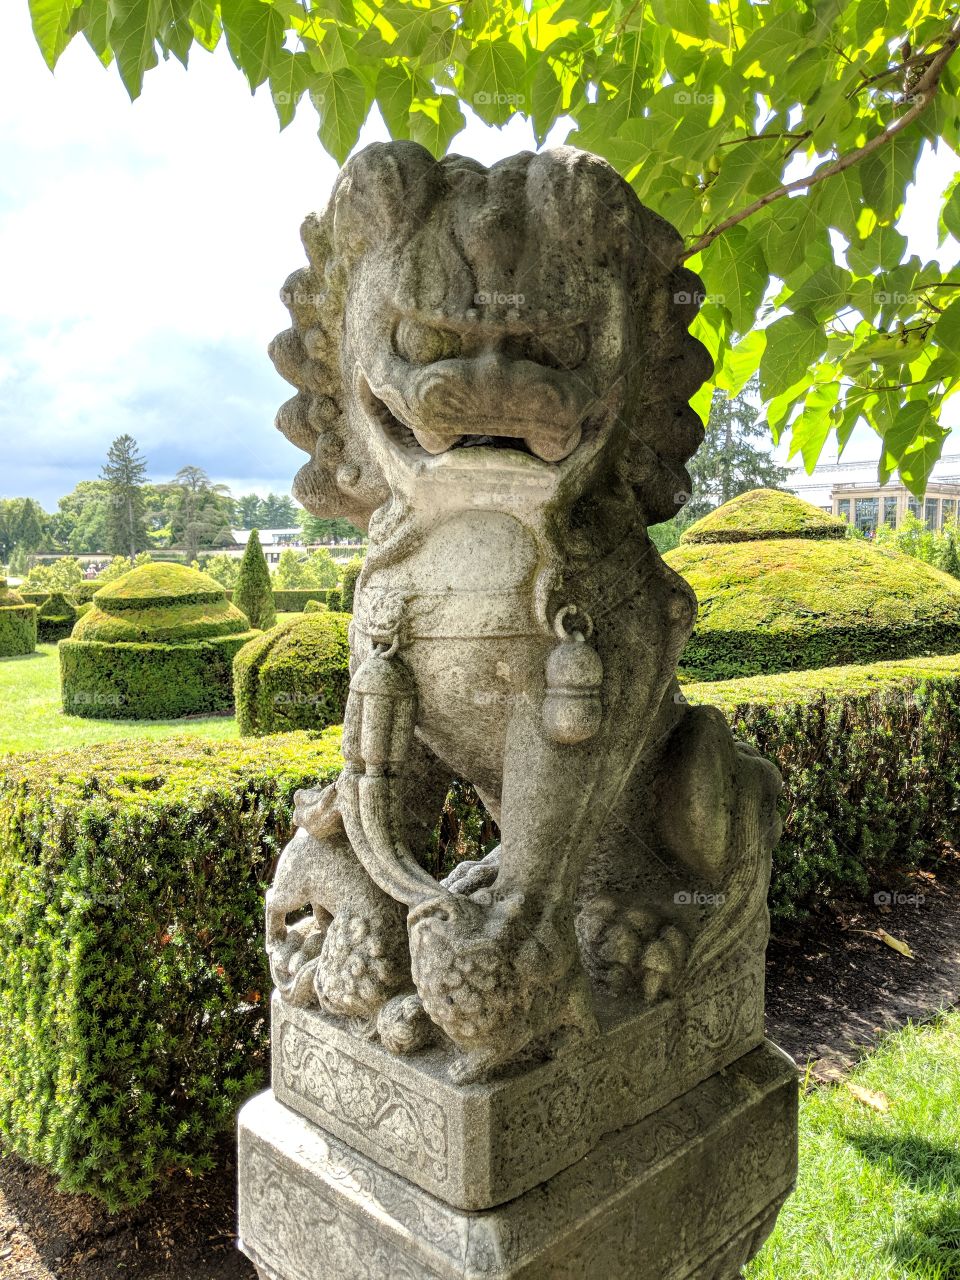 Antique asian lion garden statue and perfect topiaries under a darkening sky.